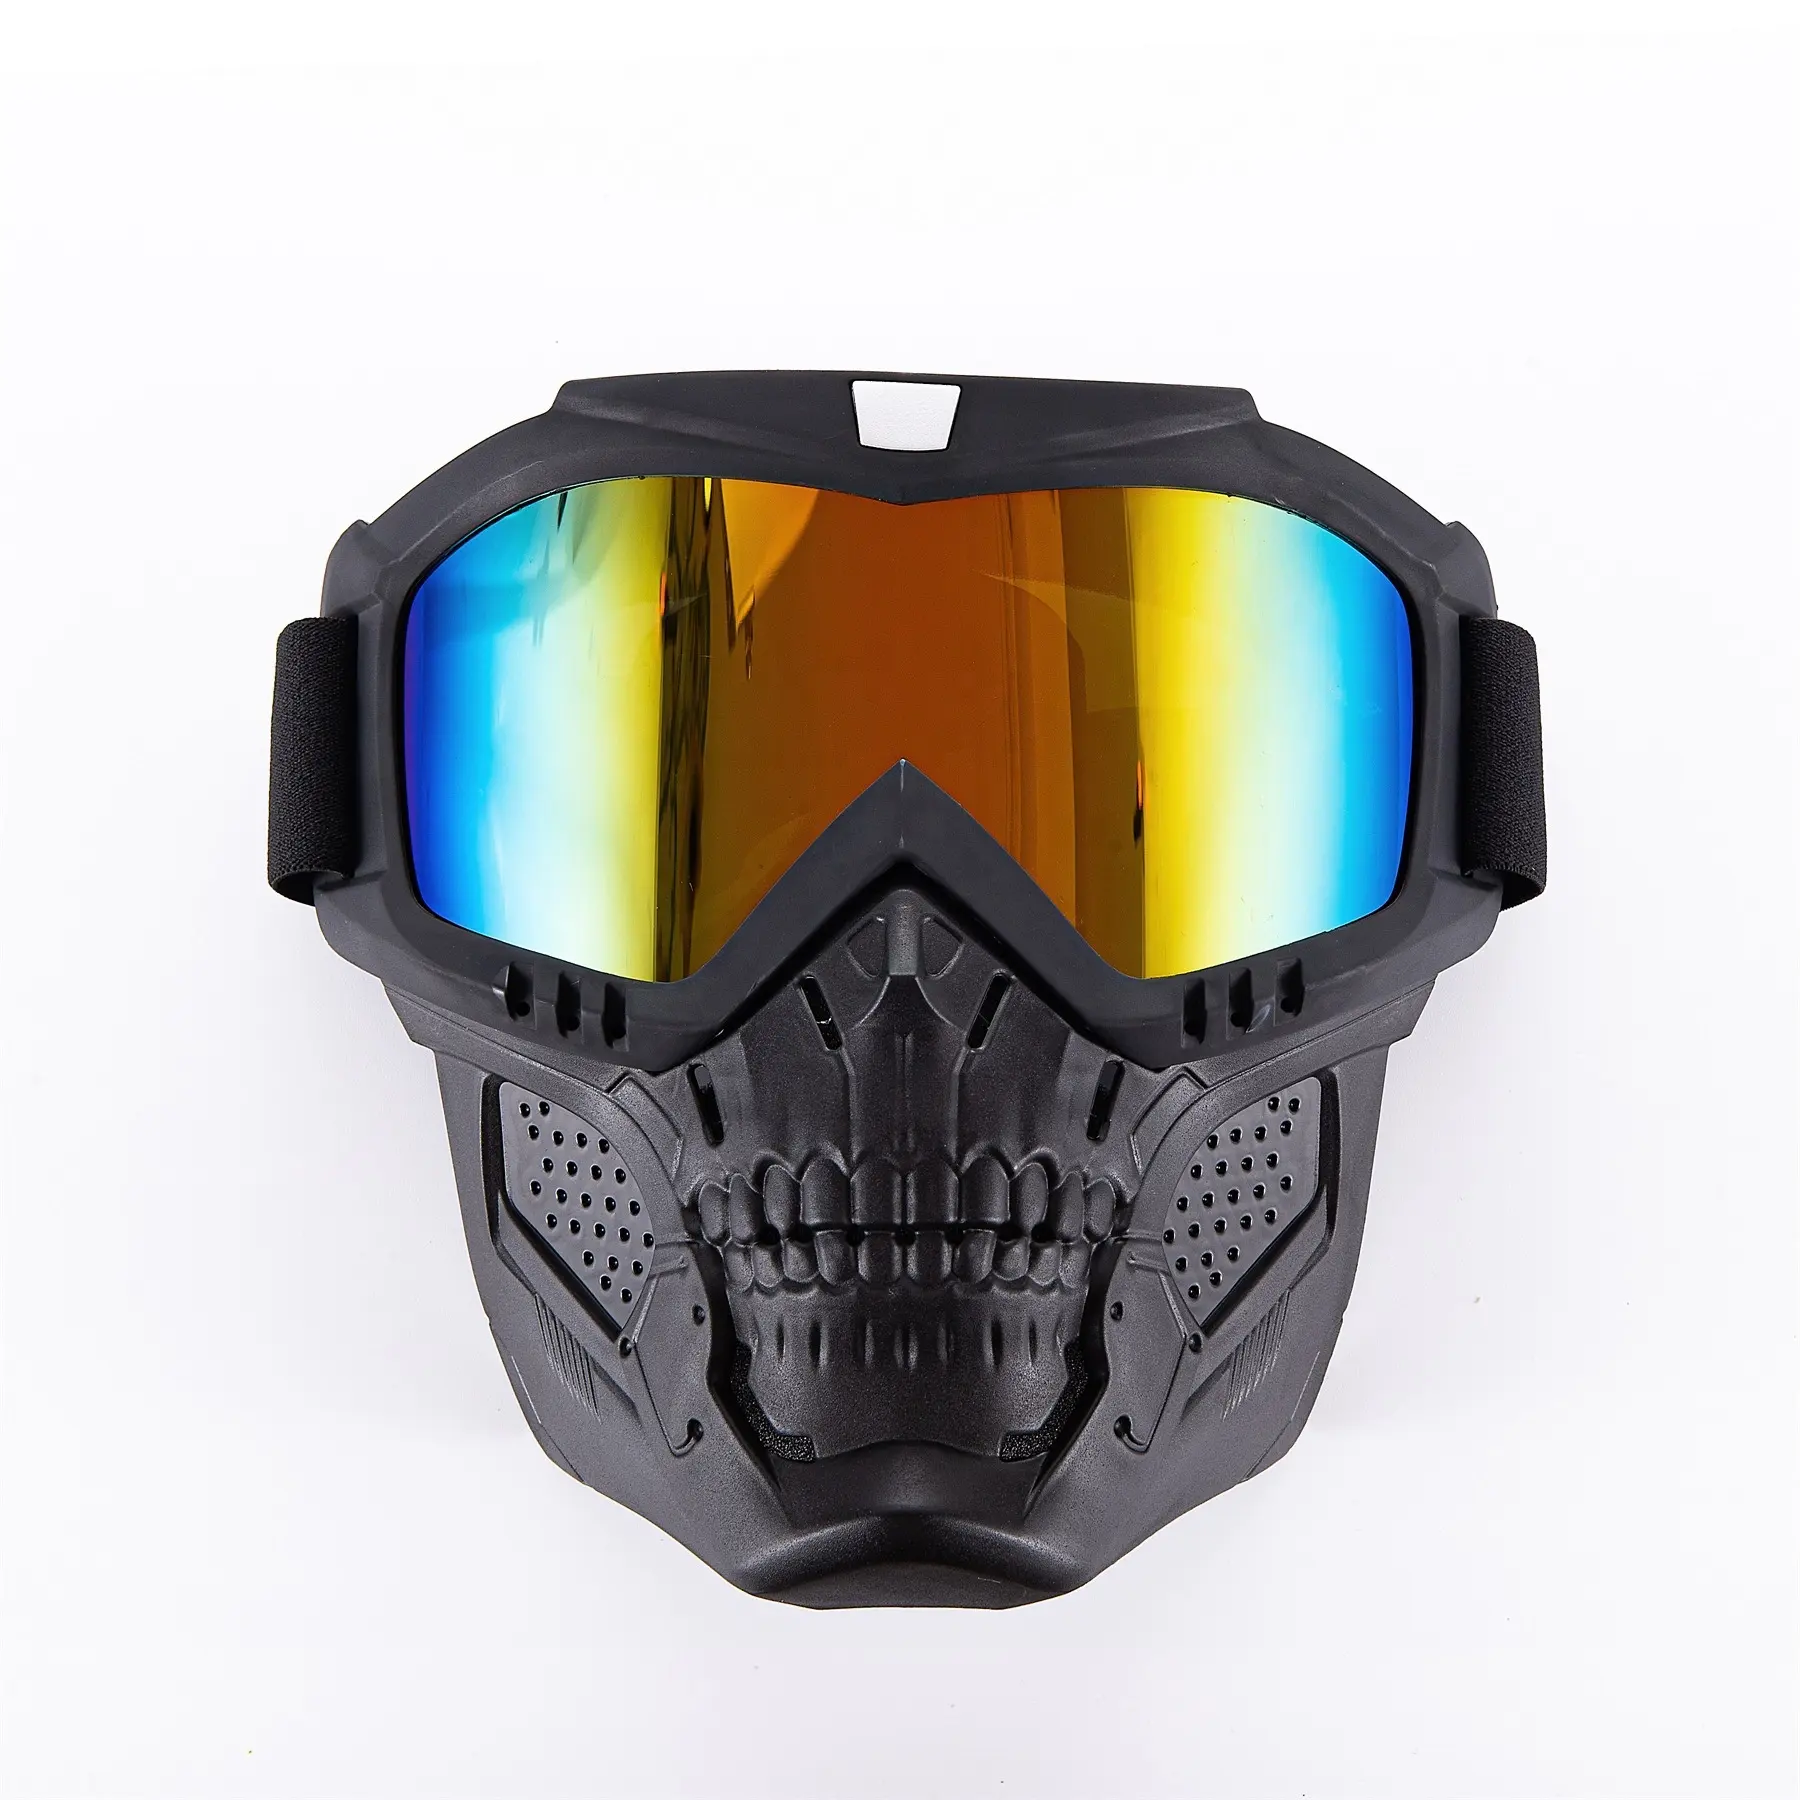 All-Weather Motorcycle Goggles Durable Wind & Debris Protection Versatile Use with Stylish Detachable Skull Mask for Riders